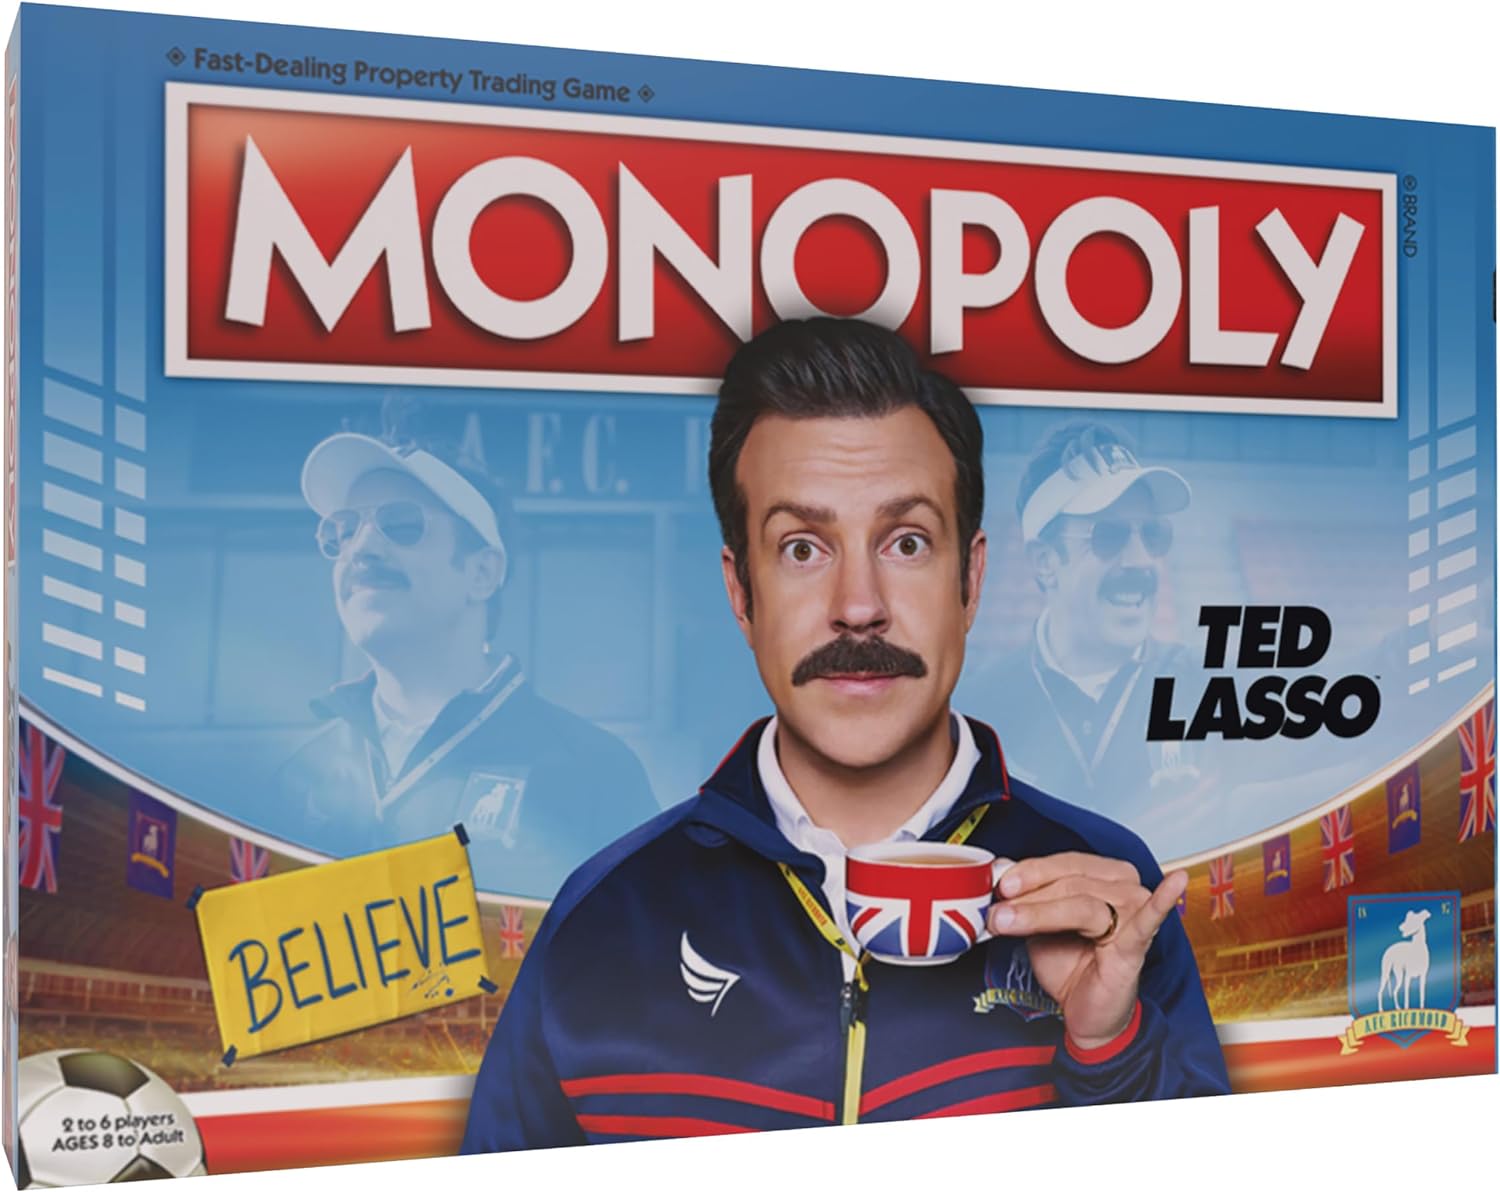 Ted Lasso Monopoly